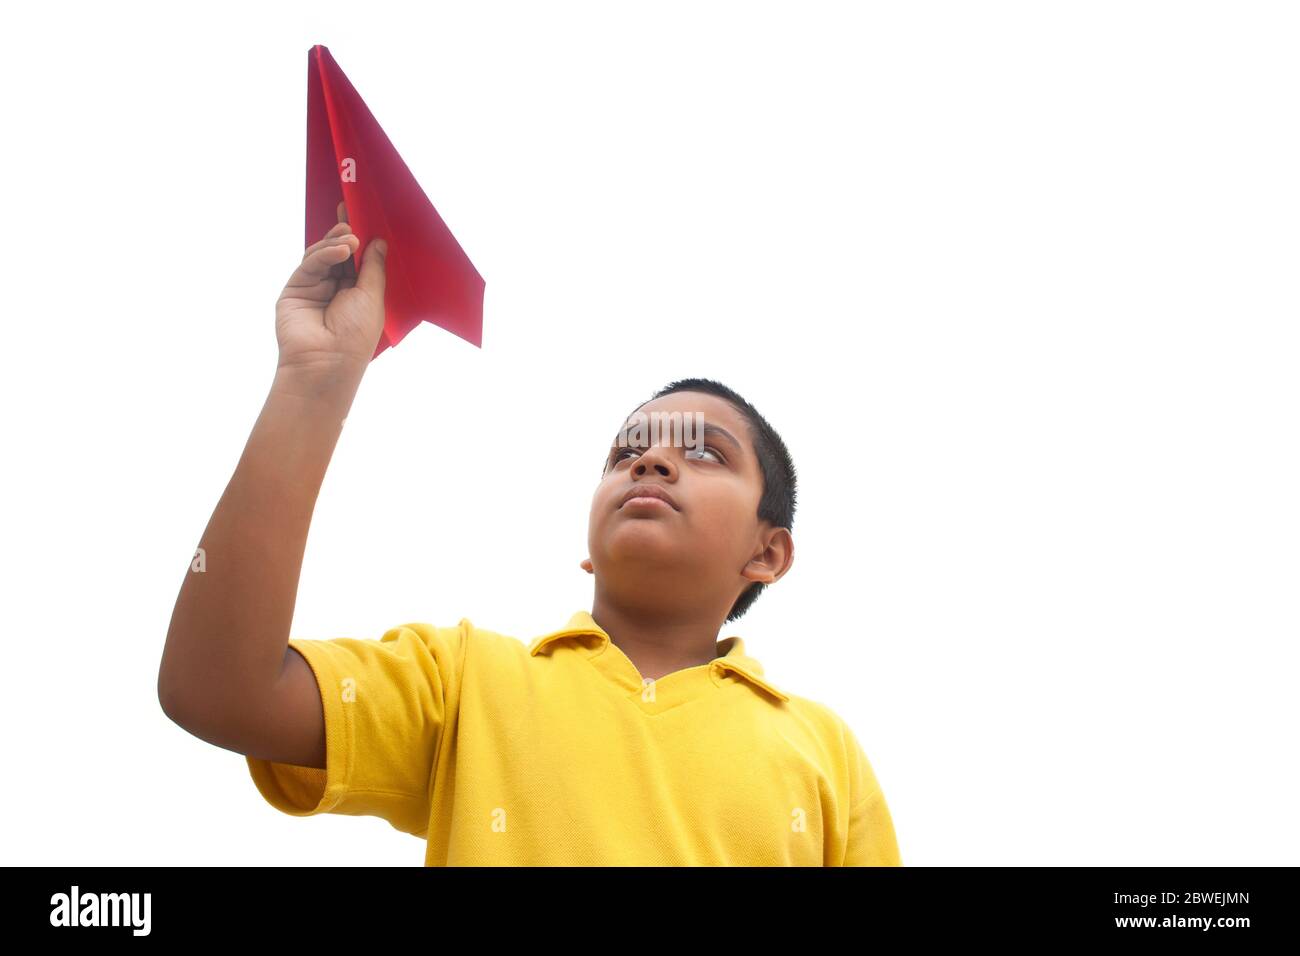 Boy playing with a paper plane and smiling Stock Photo